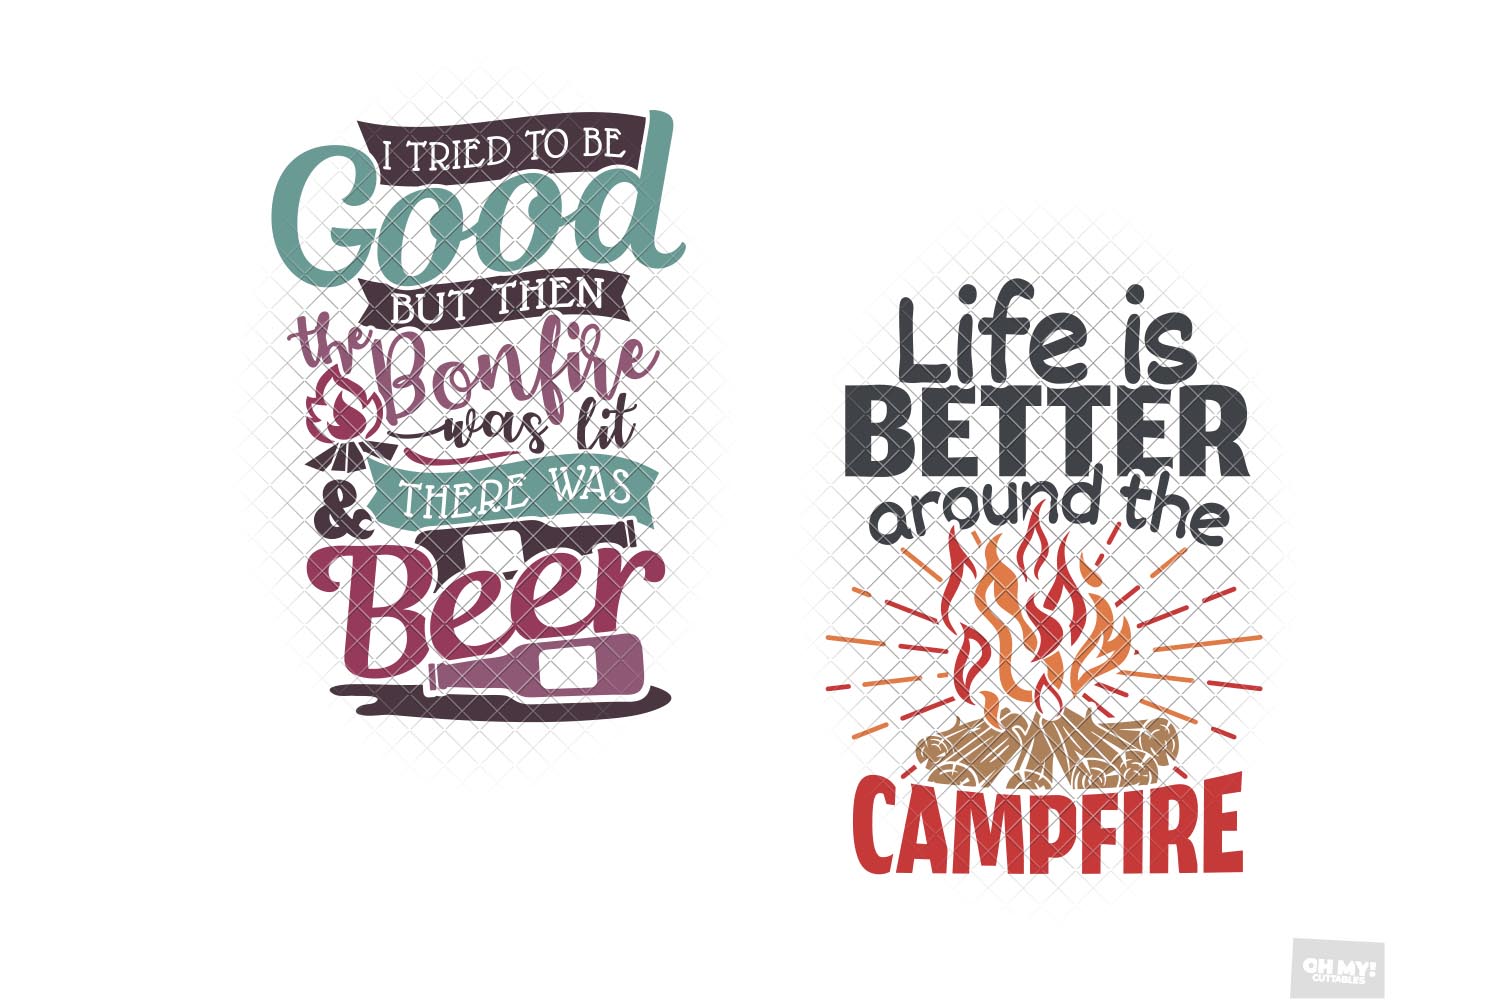 Camping SVG Files Svg camping cut file cricut silhouette svgs summer cutting cuts lovepapercrafts dxf signs camper quotes downloadable designs eps tree christmas